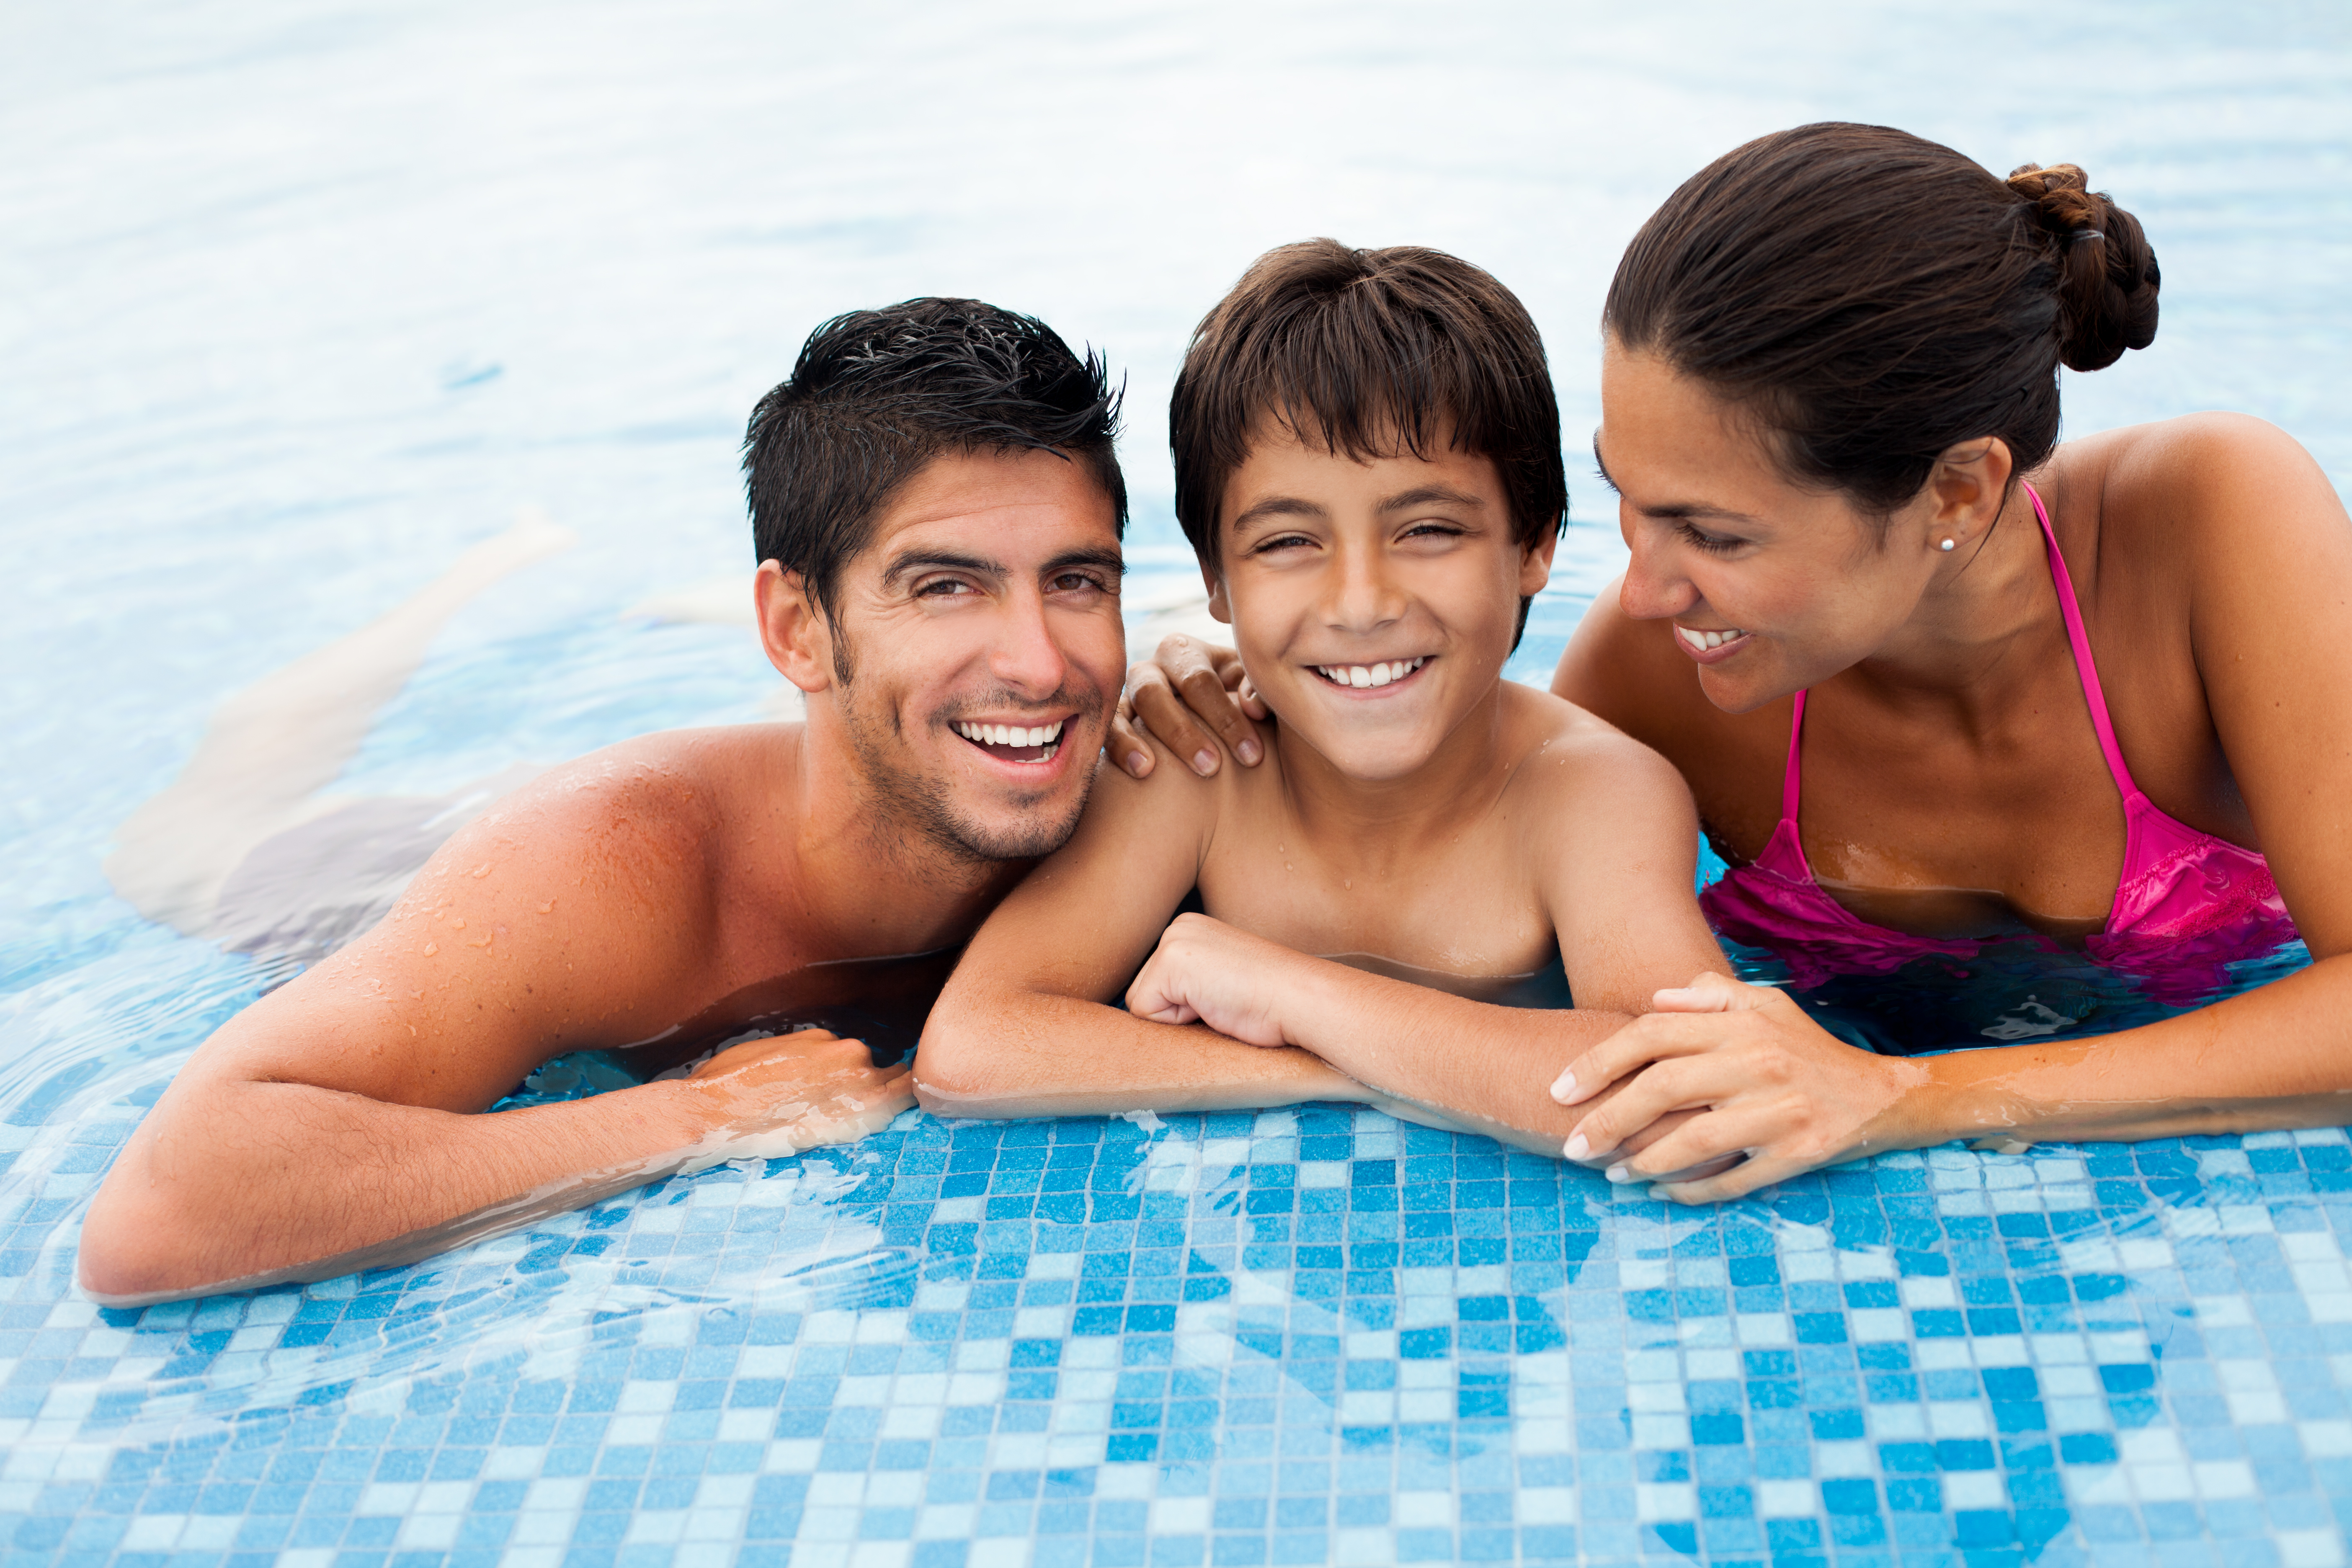 A cheerful family in a swimming pool.